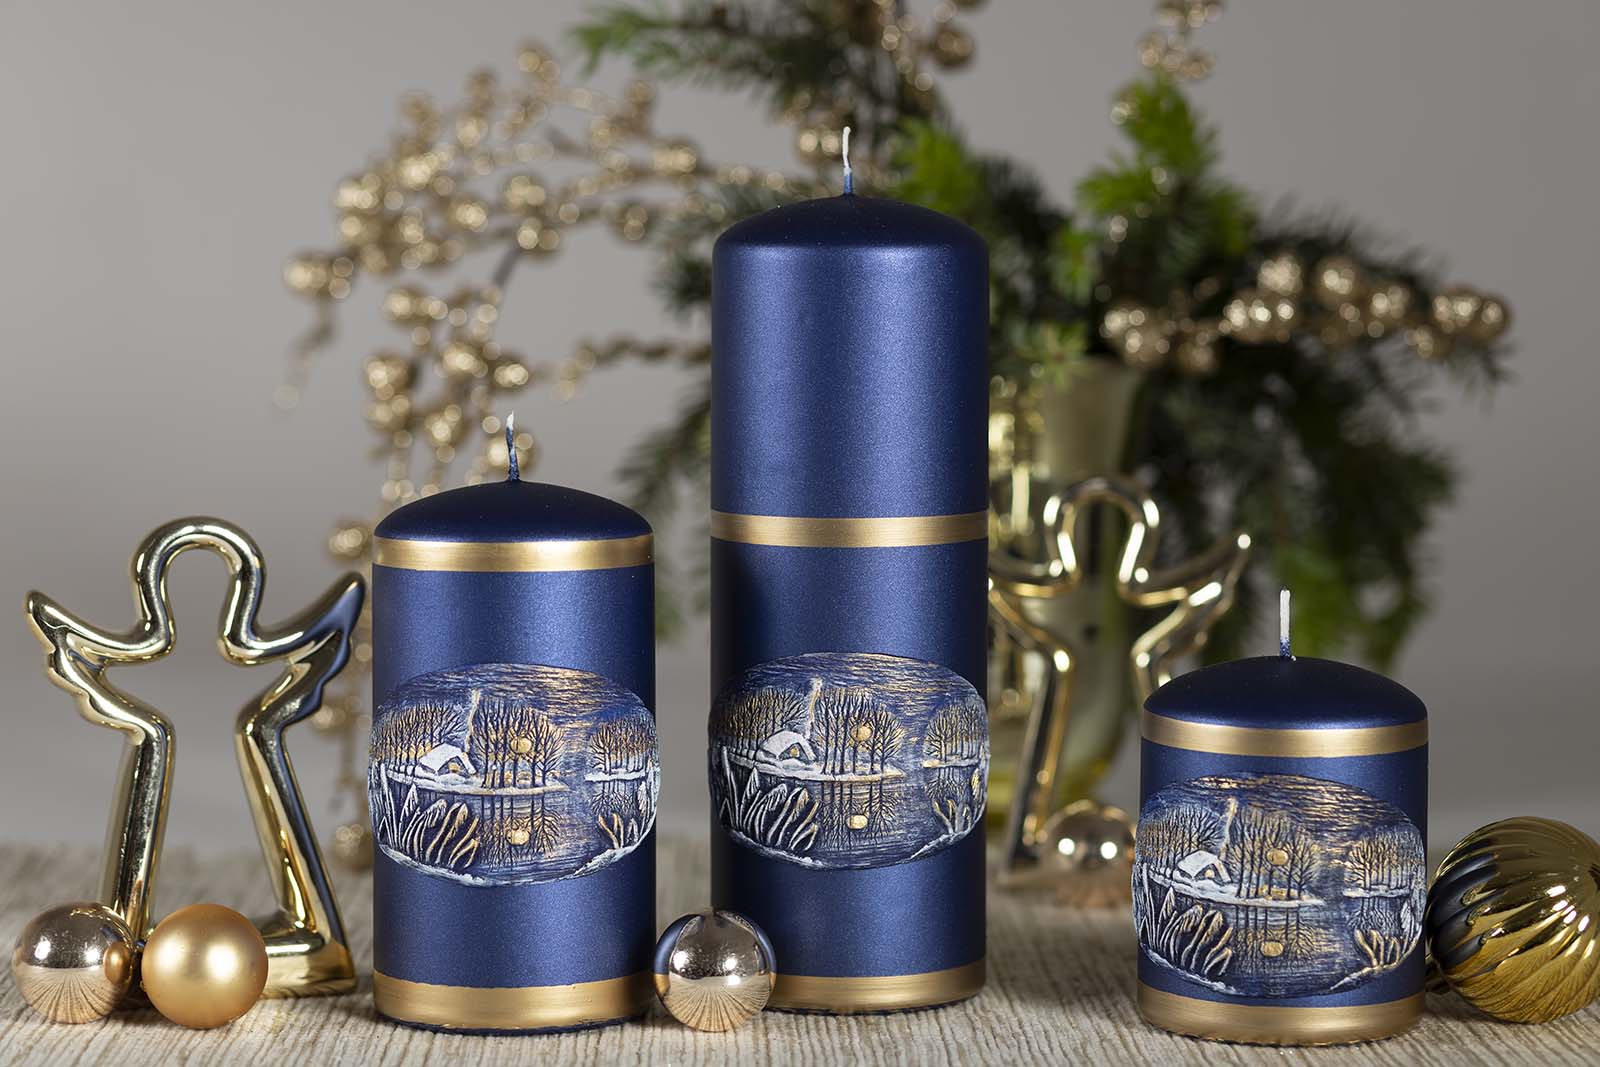 Three Pillar Christmas candles with Winter Lake ornament sitting beside two golden angels and Christmas bubbles 